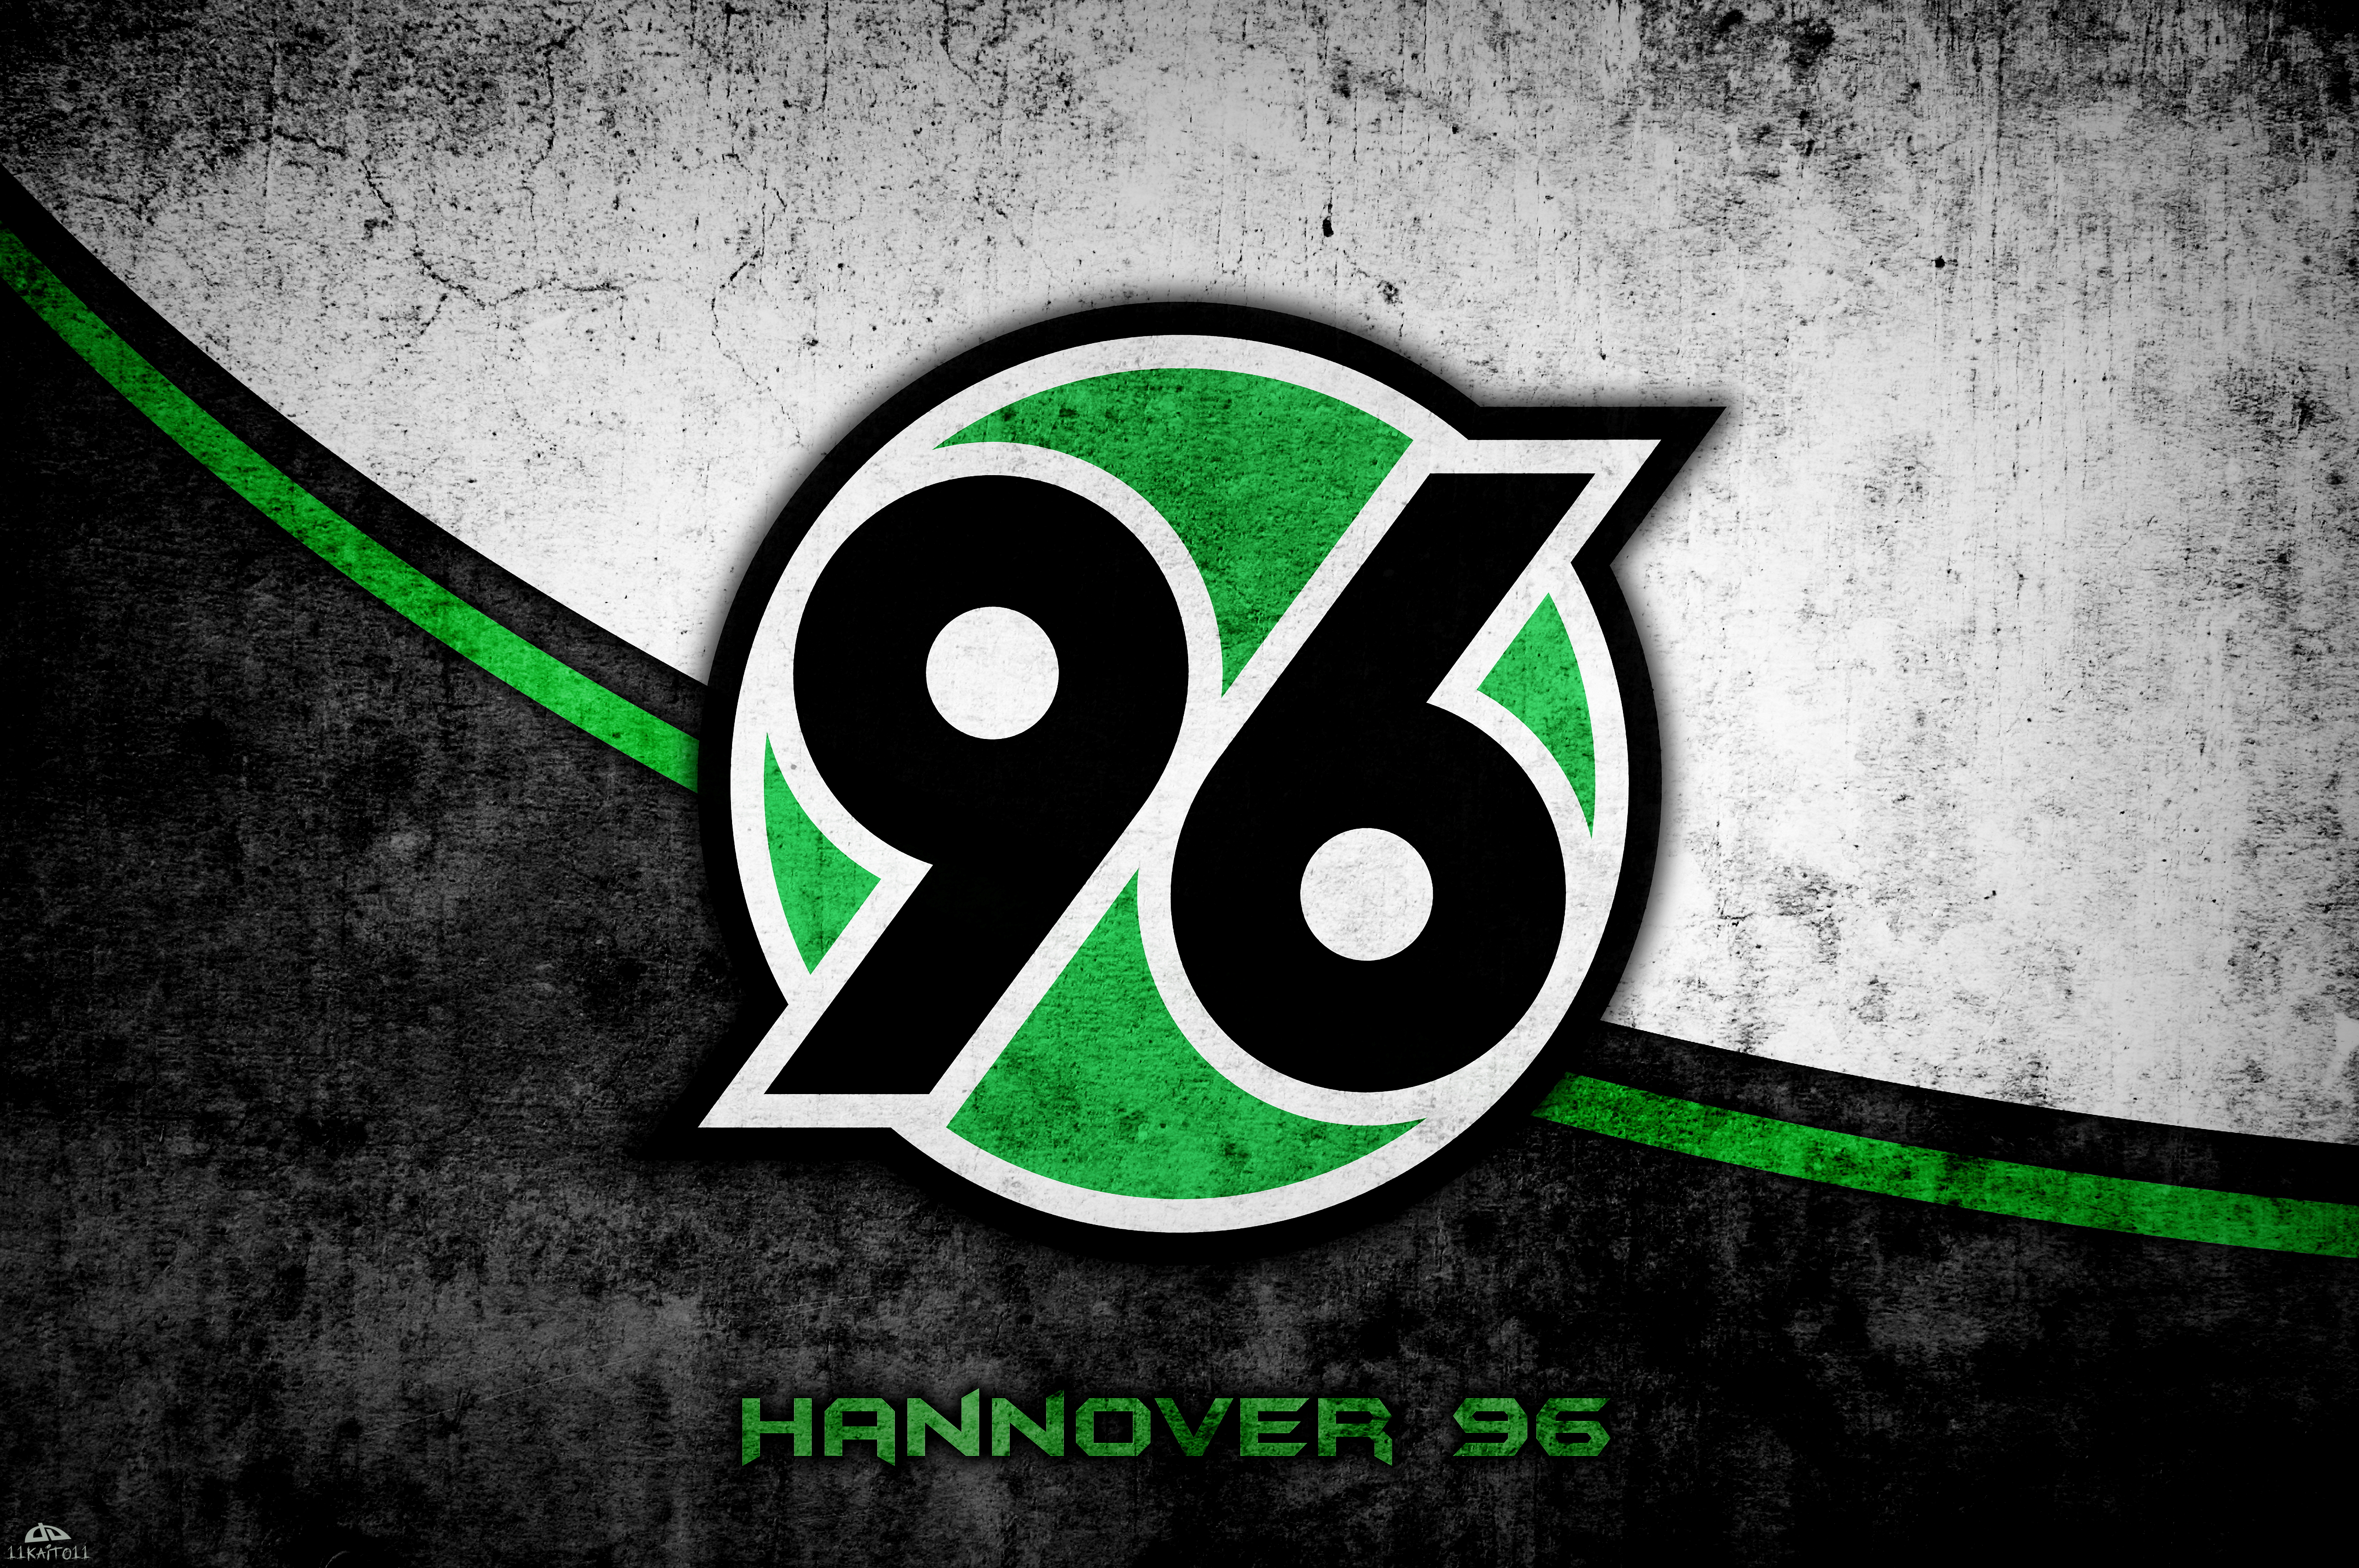 Hannover 96 Wallpapers.